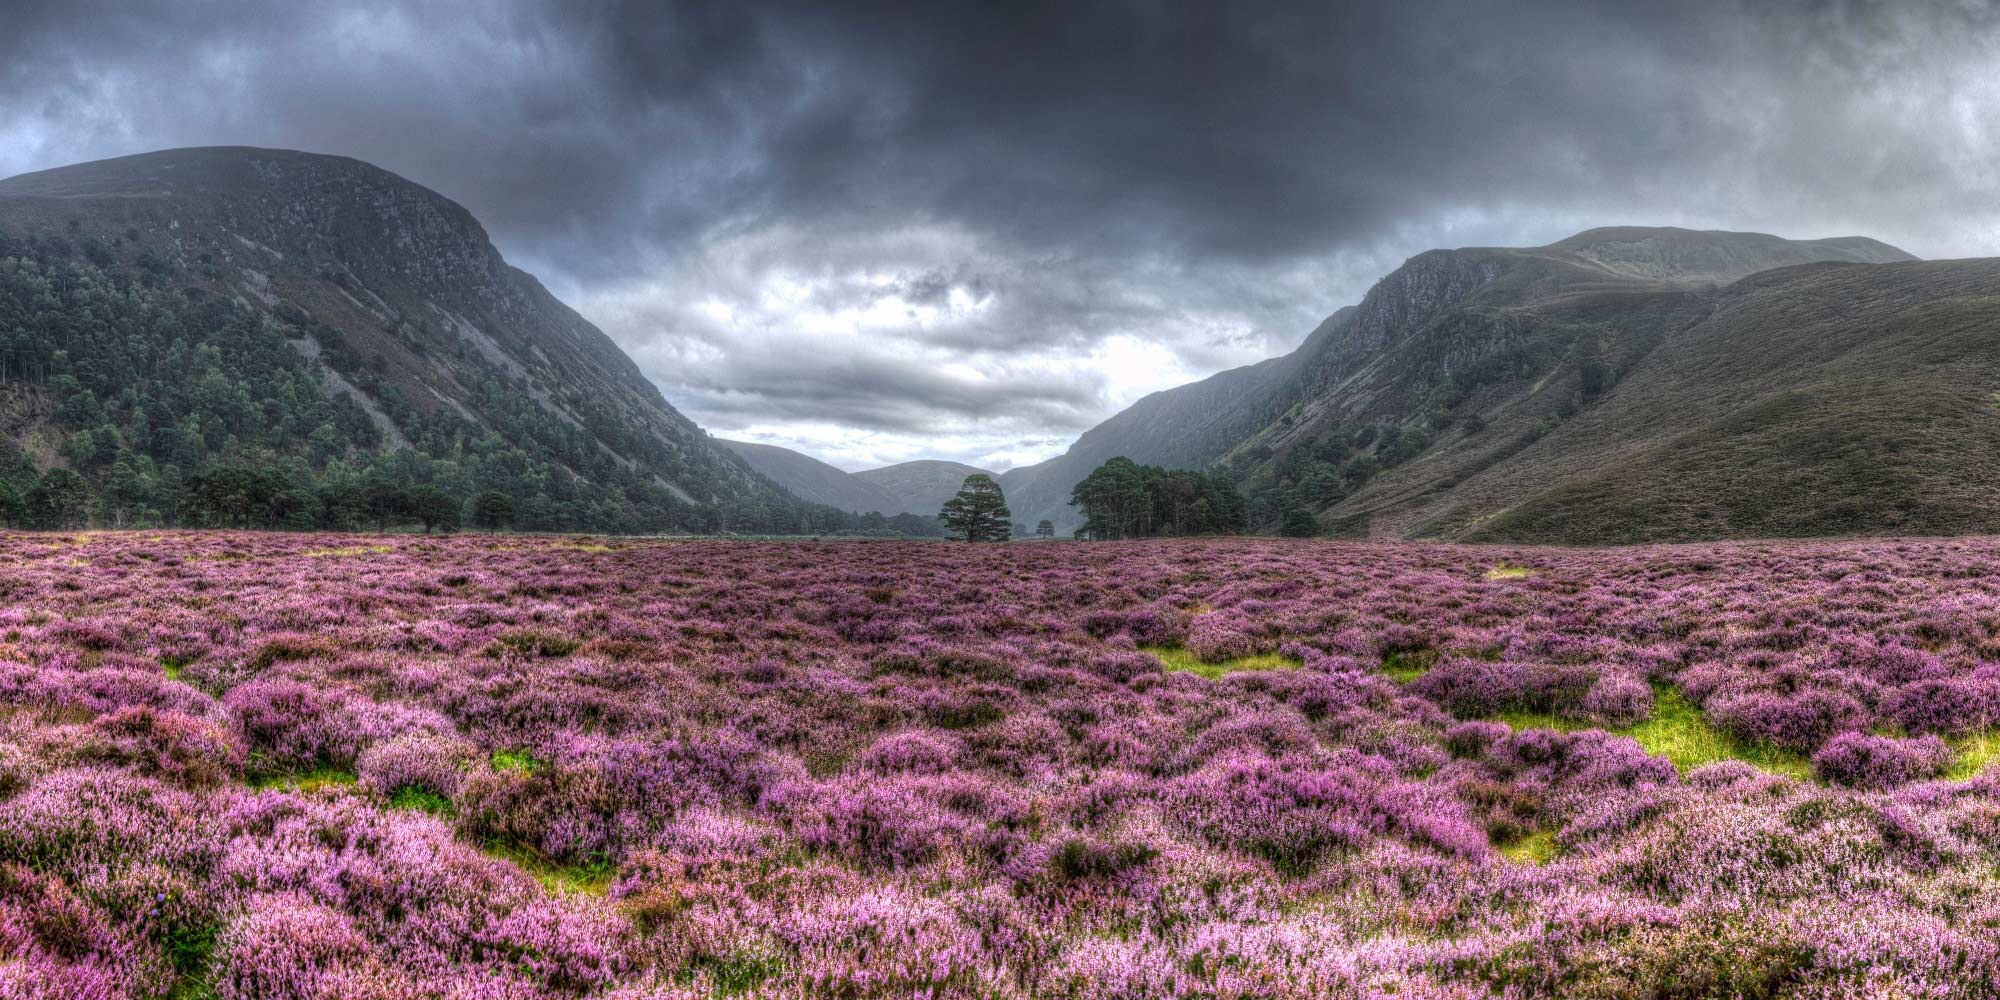 Heather fillled valley in front of mountains under a stormy sky